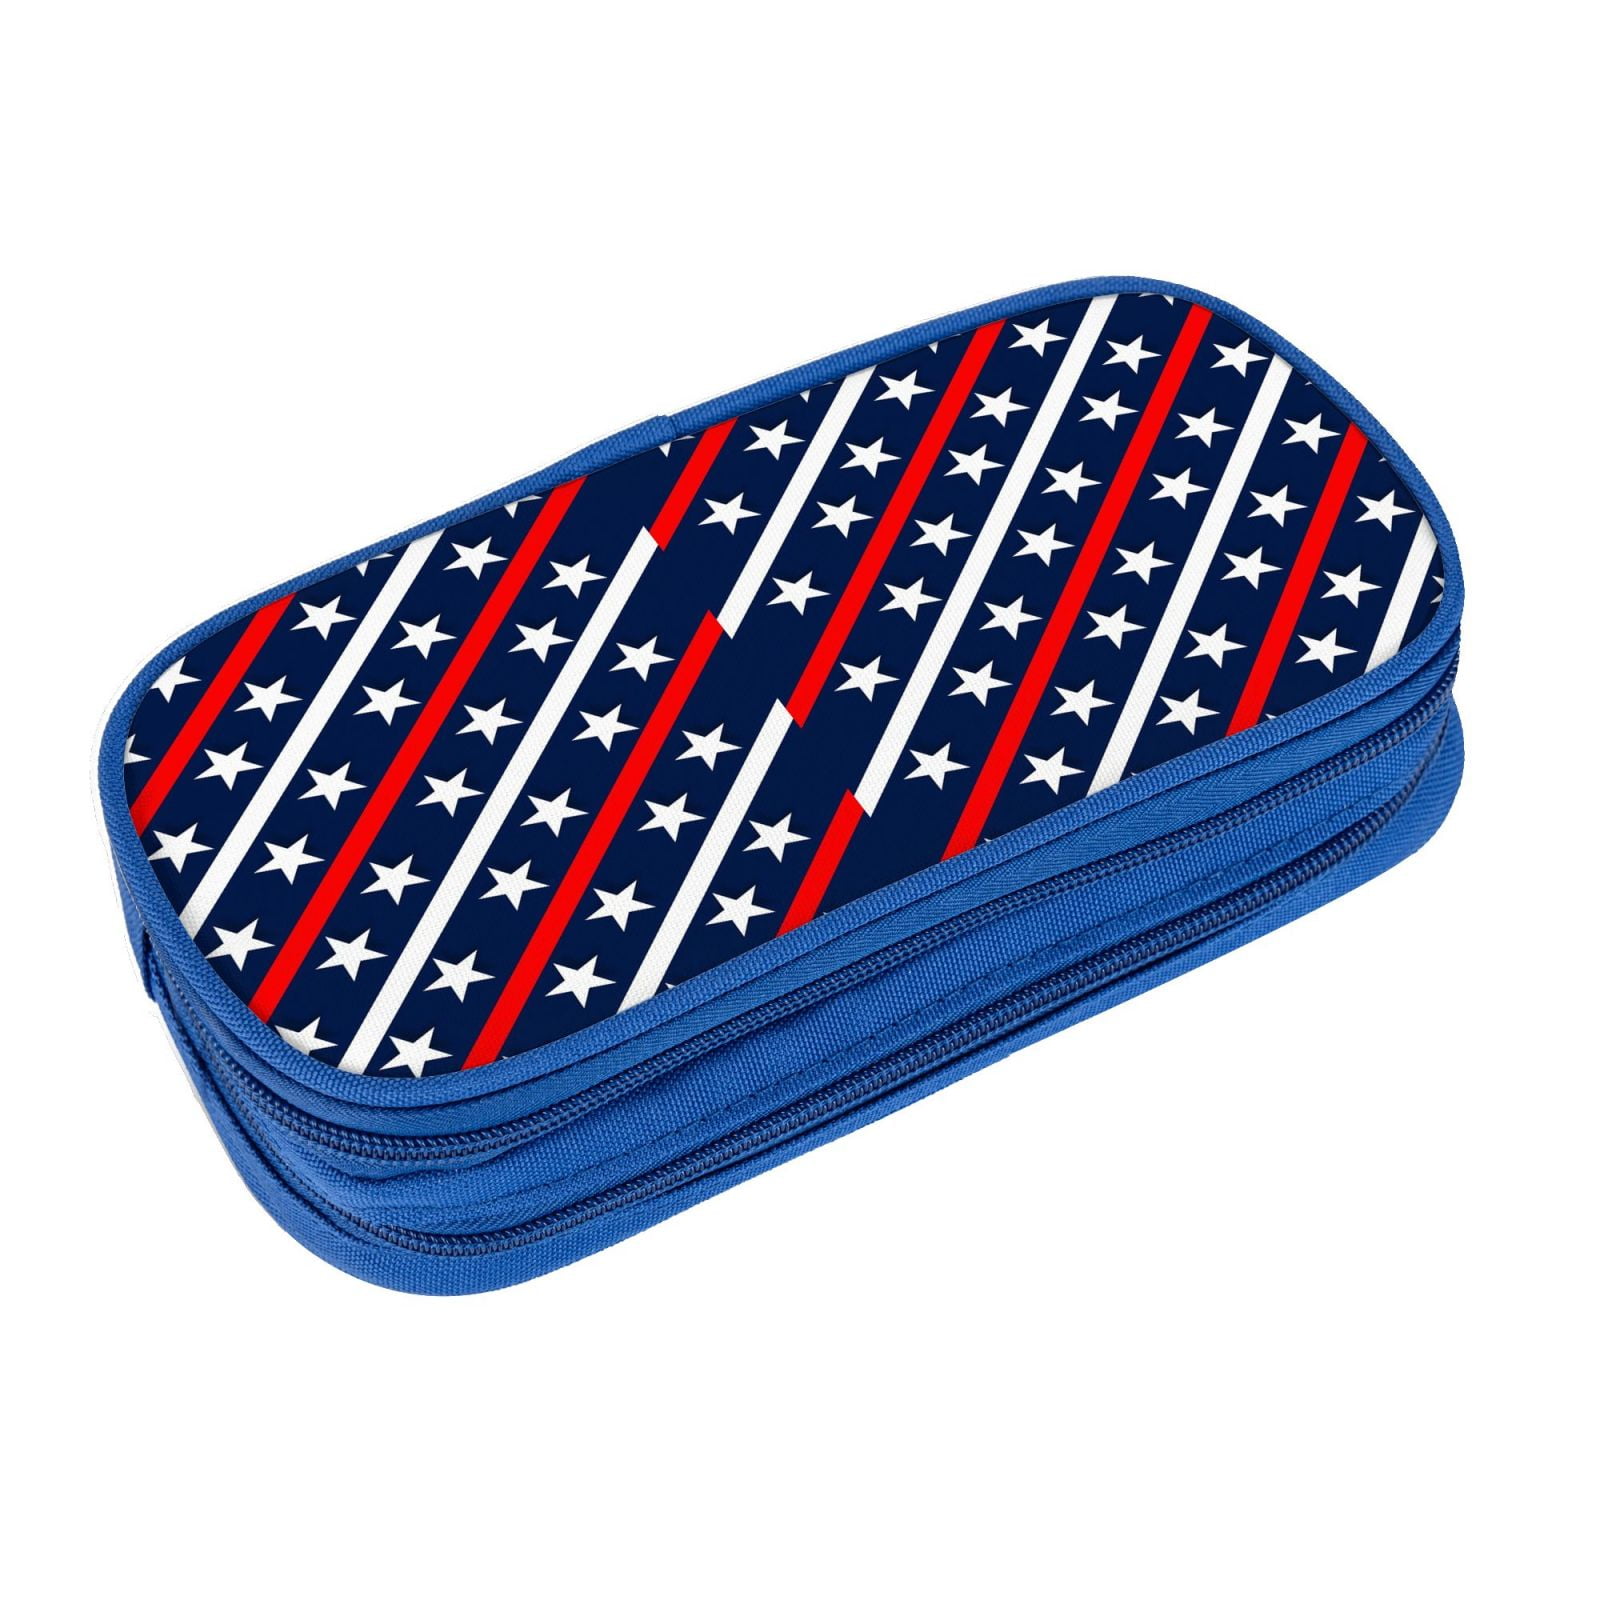 Blue Pencil White Bags XMXY Large Portable Patriotic Zipper Strips Pencil Case, with Capacity Stars Red Compartments Blue